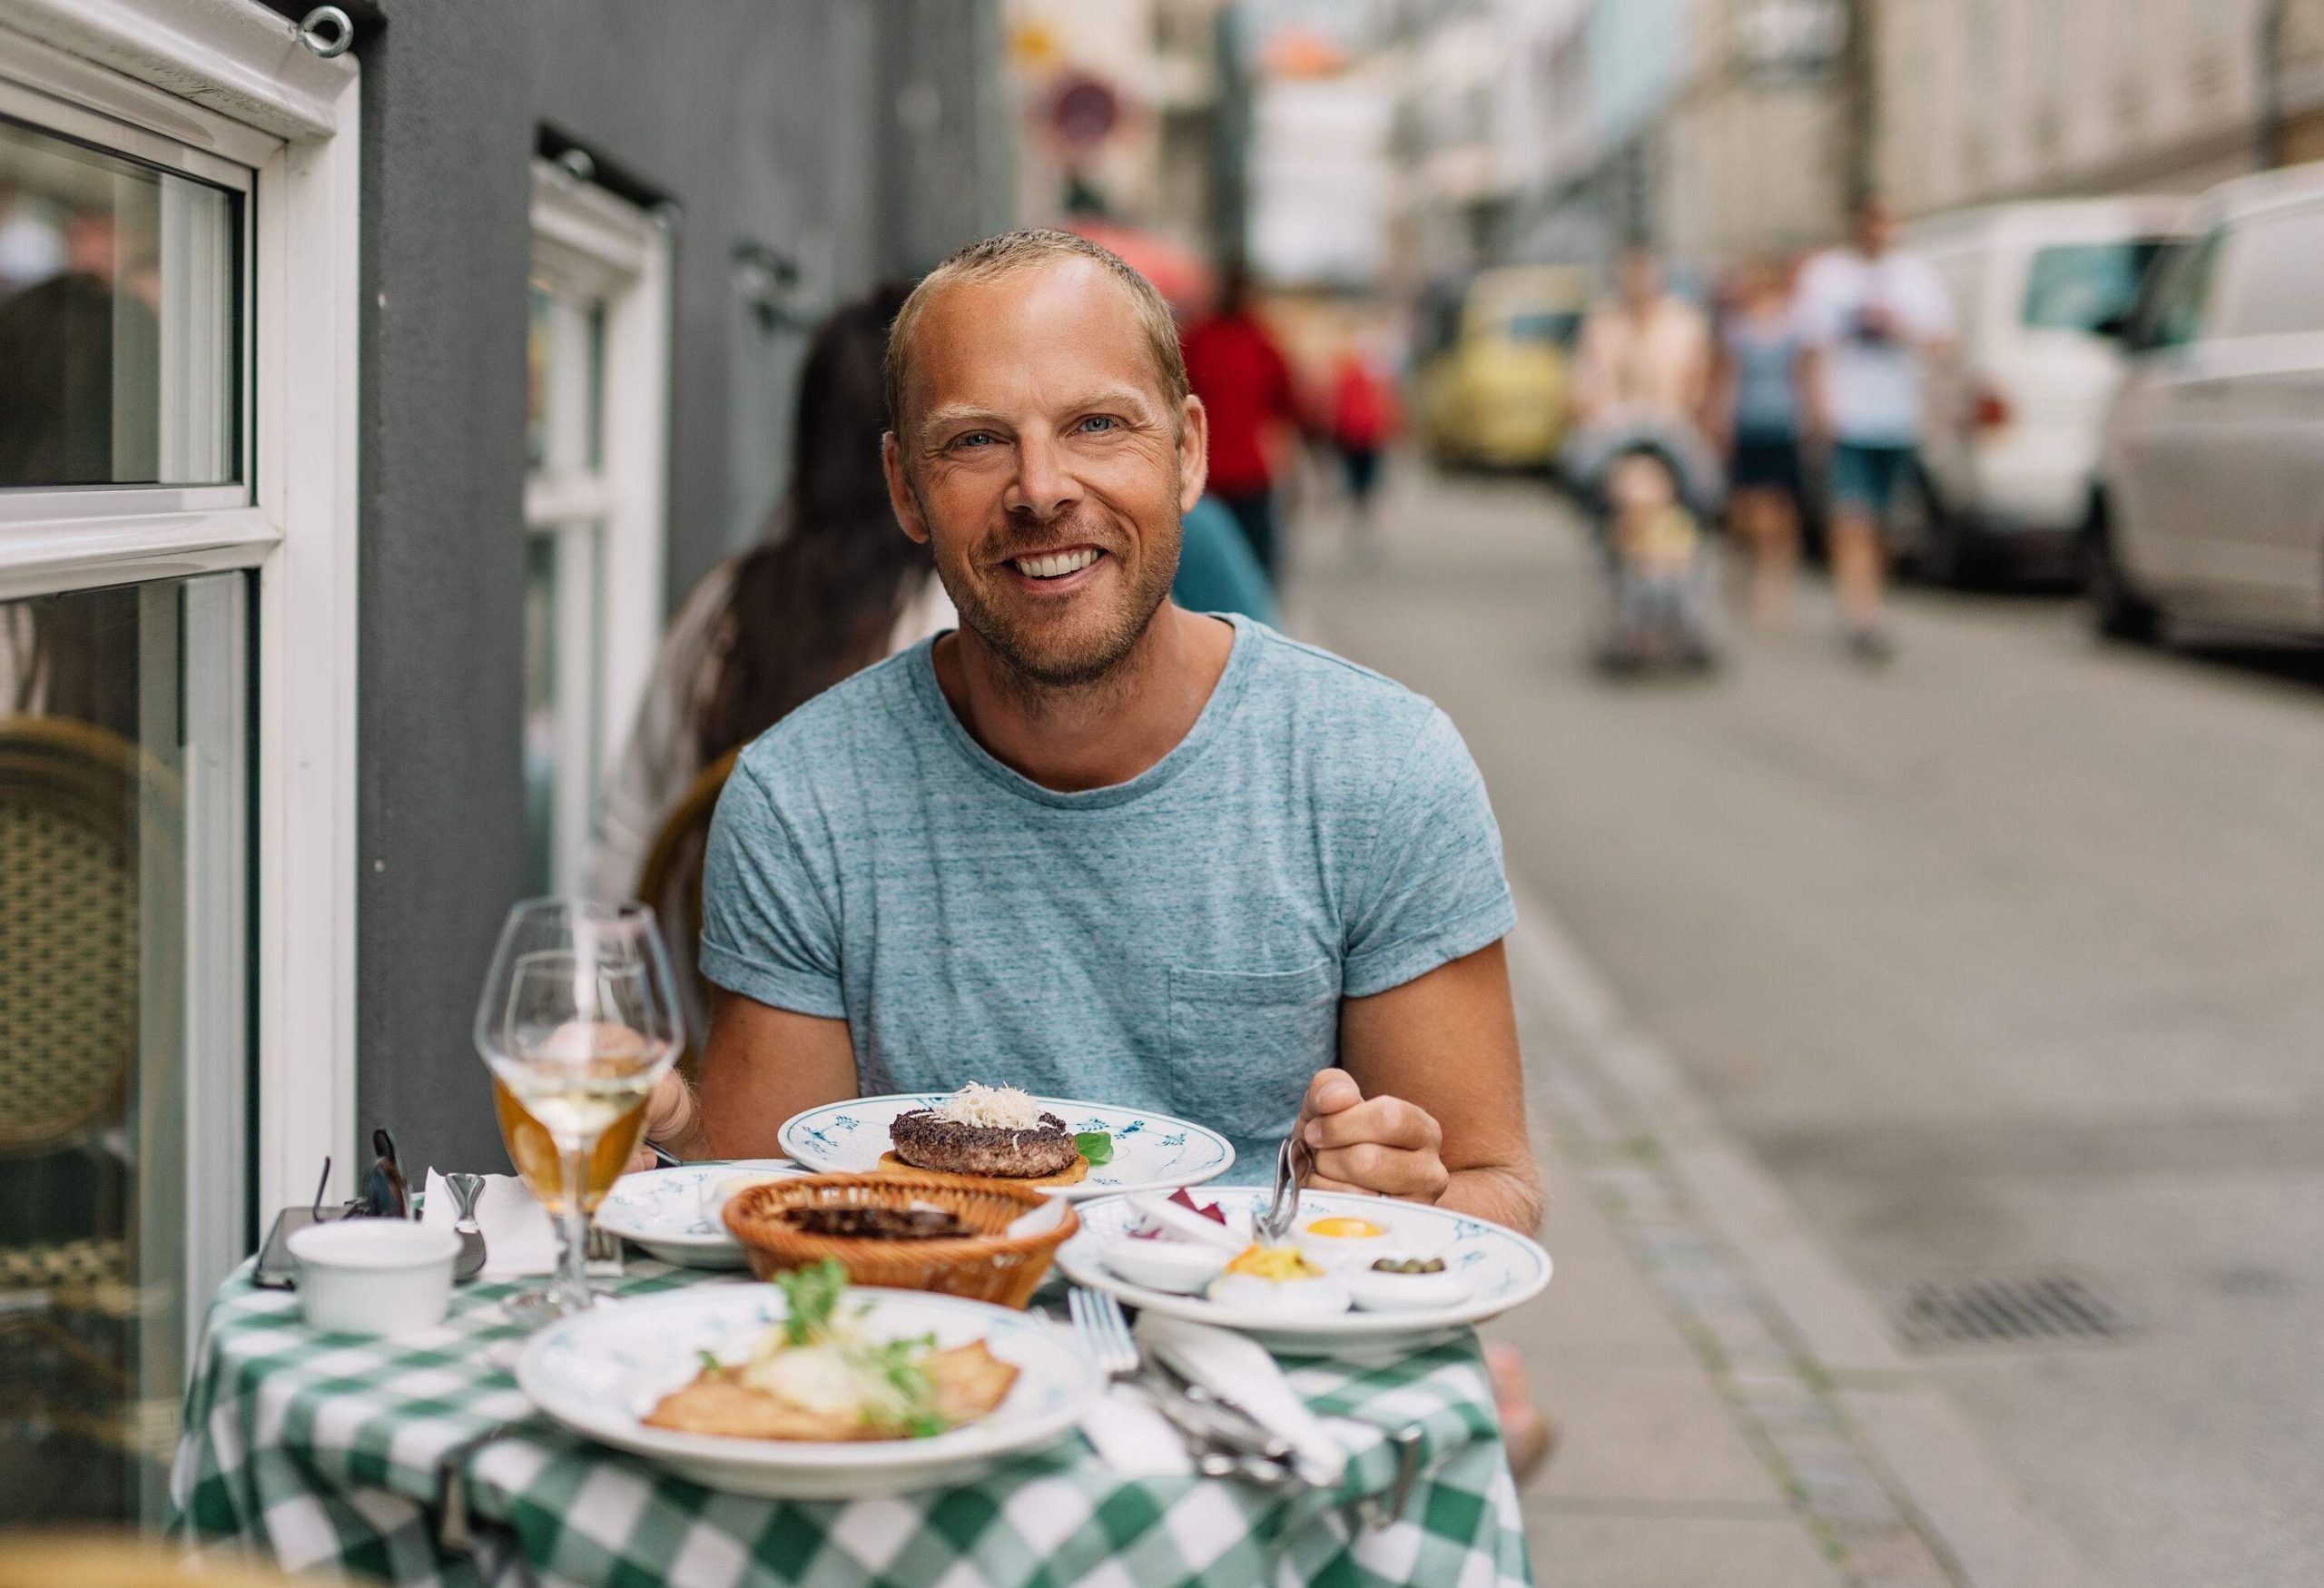 A man smiles as he sits in front of a table filled with food.